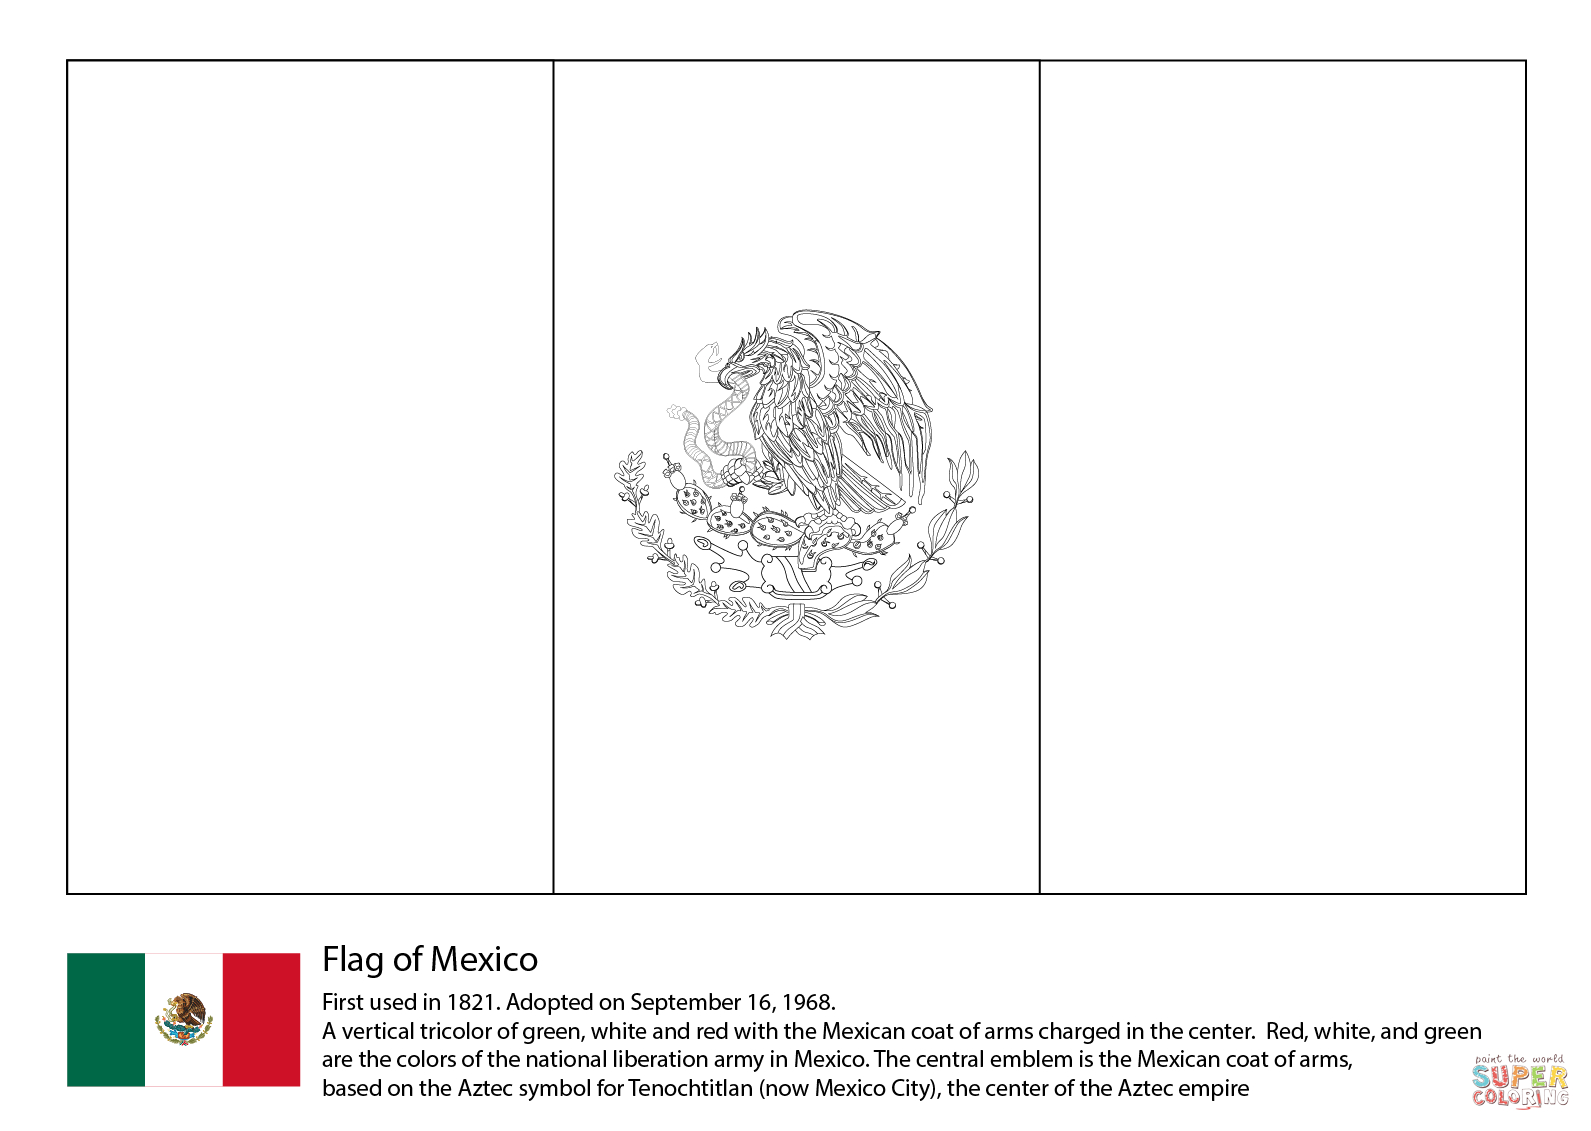 Mexico Flag Coloring Page | Free Printable Coloring Pages - Free Printable Blank Flag Template